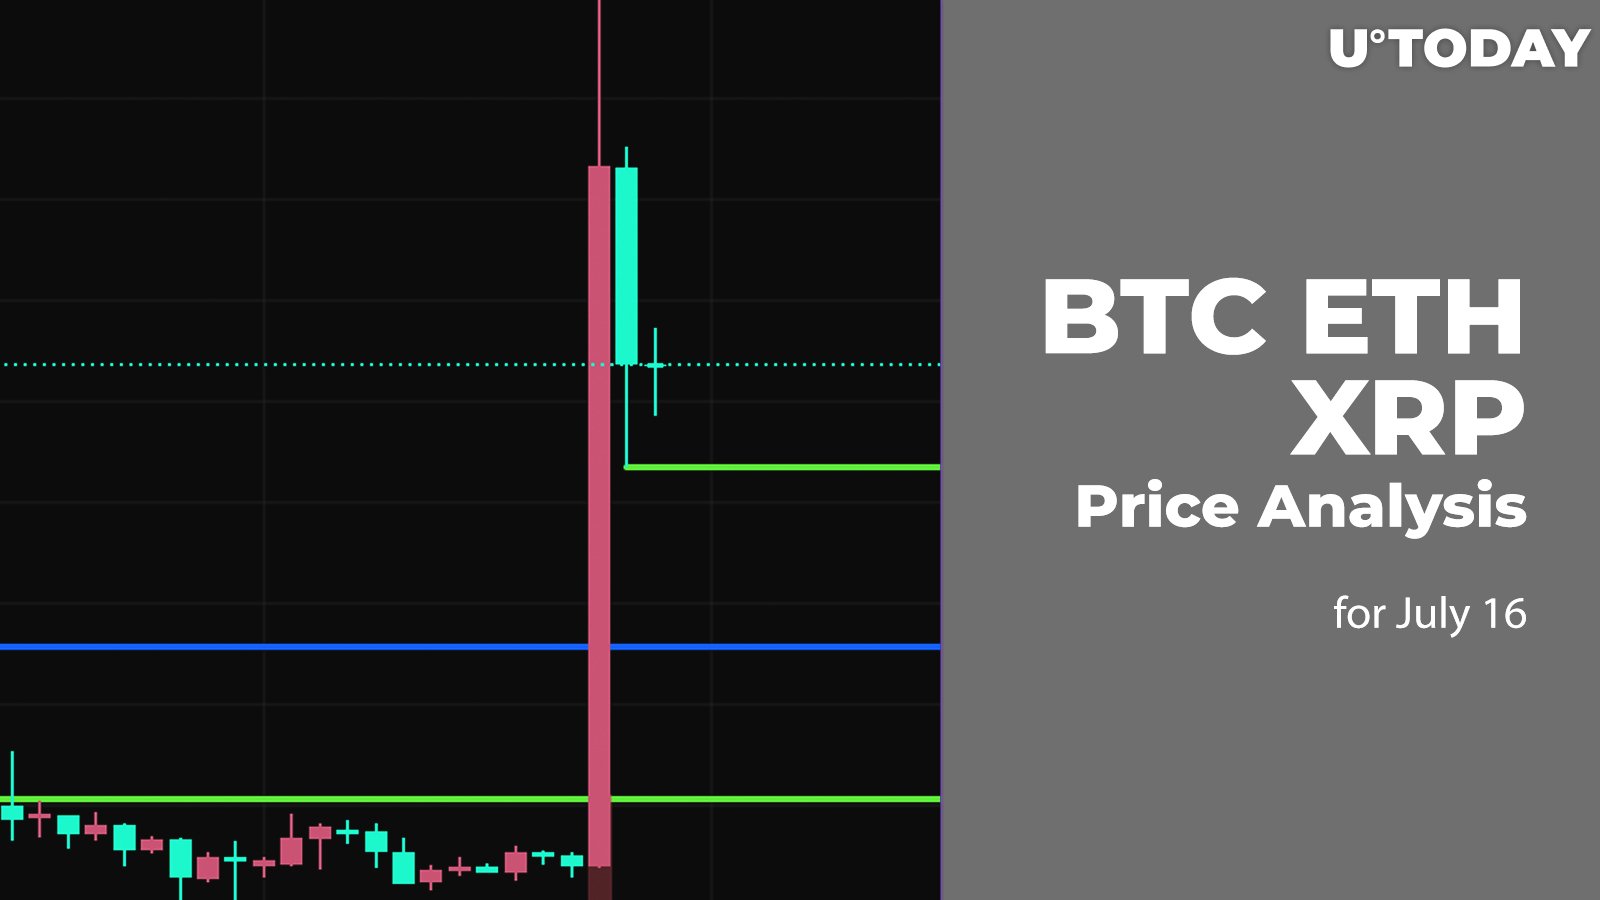 BTC, ETH and XRP Price Analysis for July 16